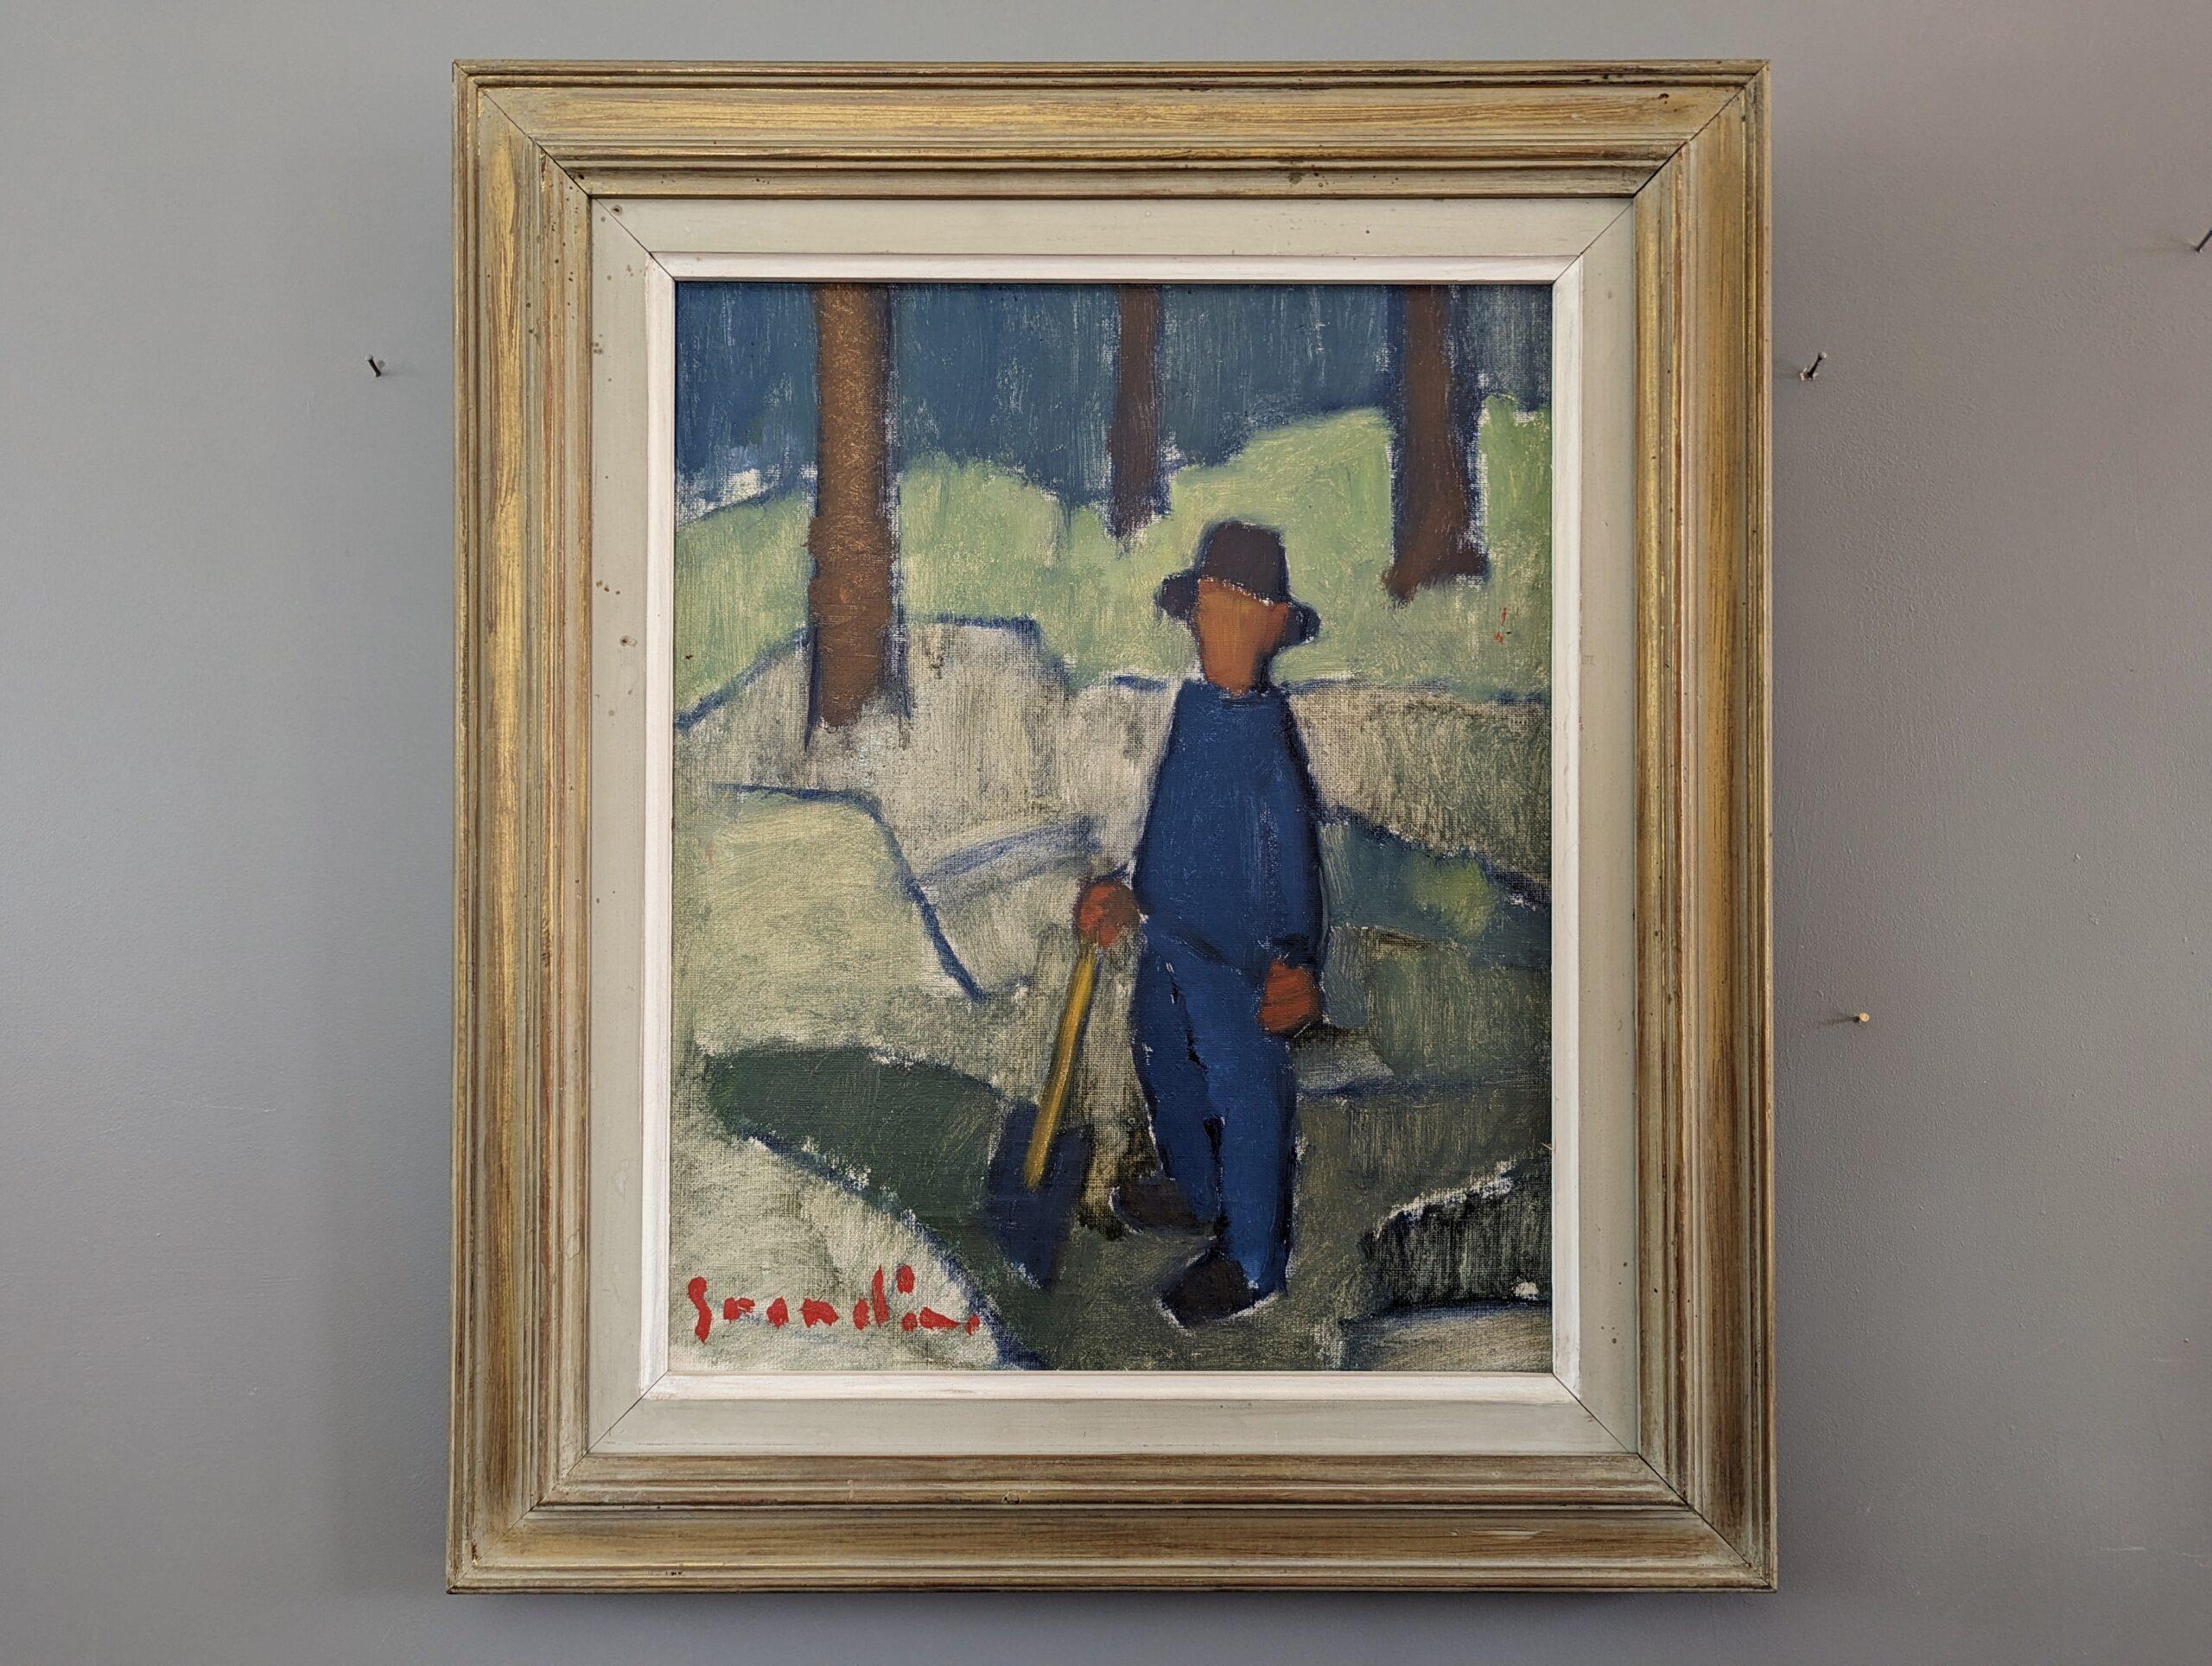 THE GARDENER
Size: 52 x 45 cm (including frame)
Oil on Canvas

An expressive mid-century landscape composition, painted in oil onto canvas.

The painting encapsulates a scene of quiet work, where a male figure is depicted holding a long shovel